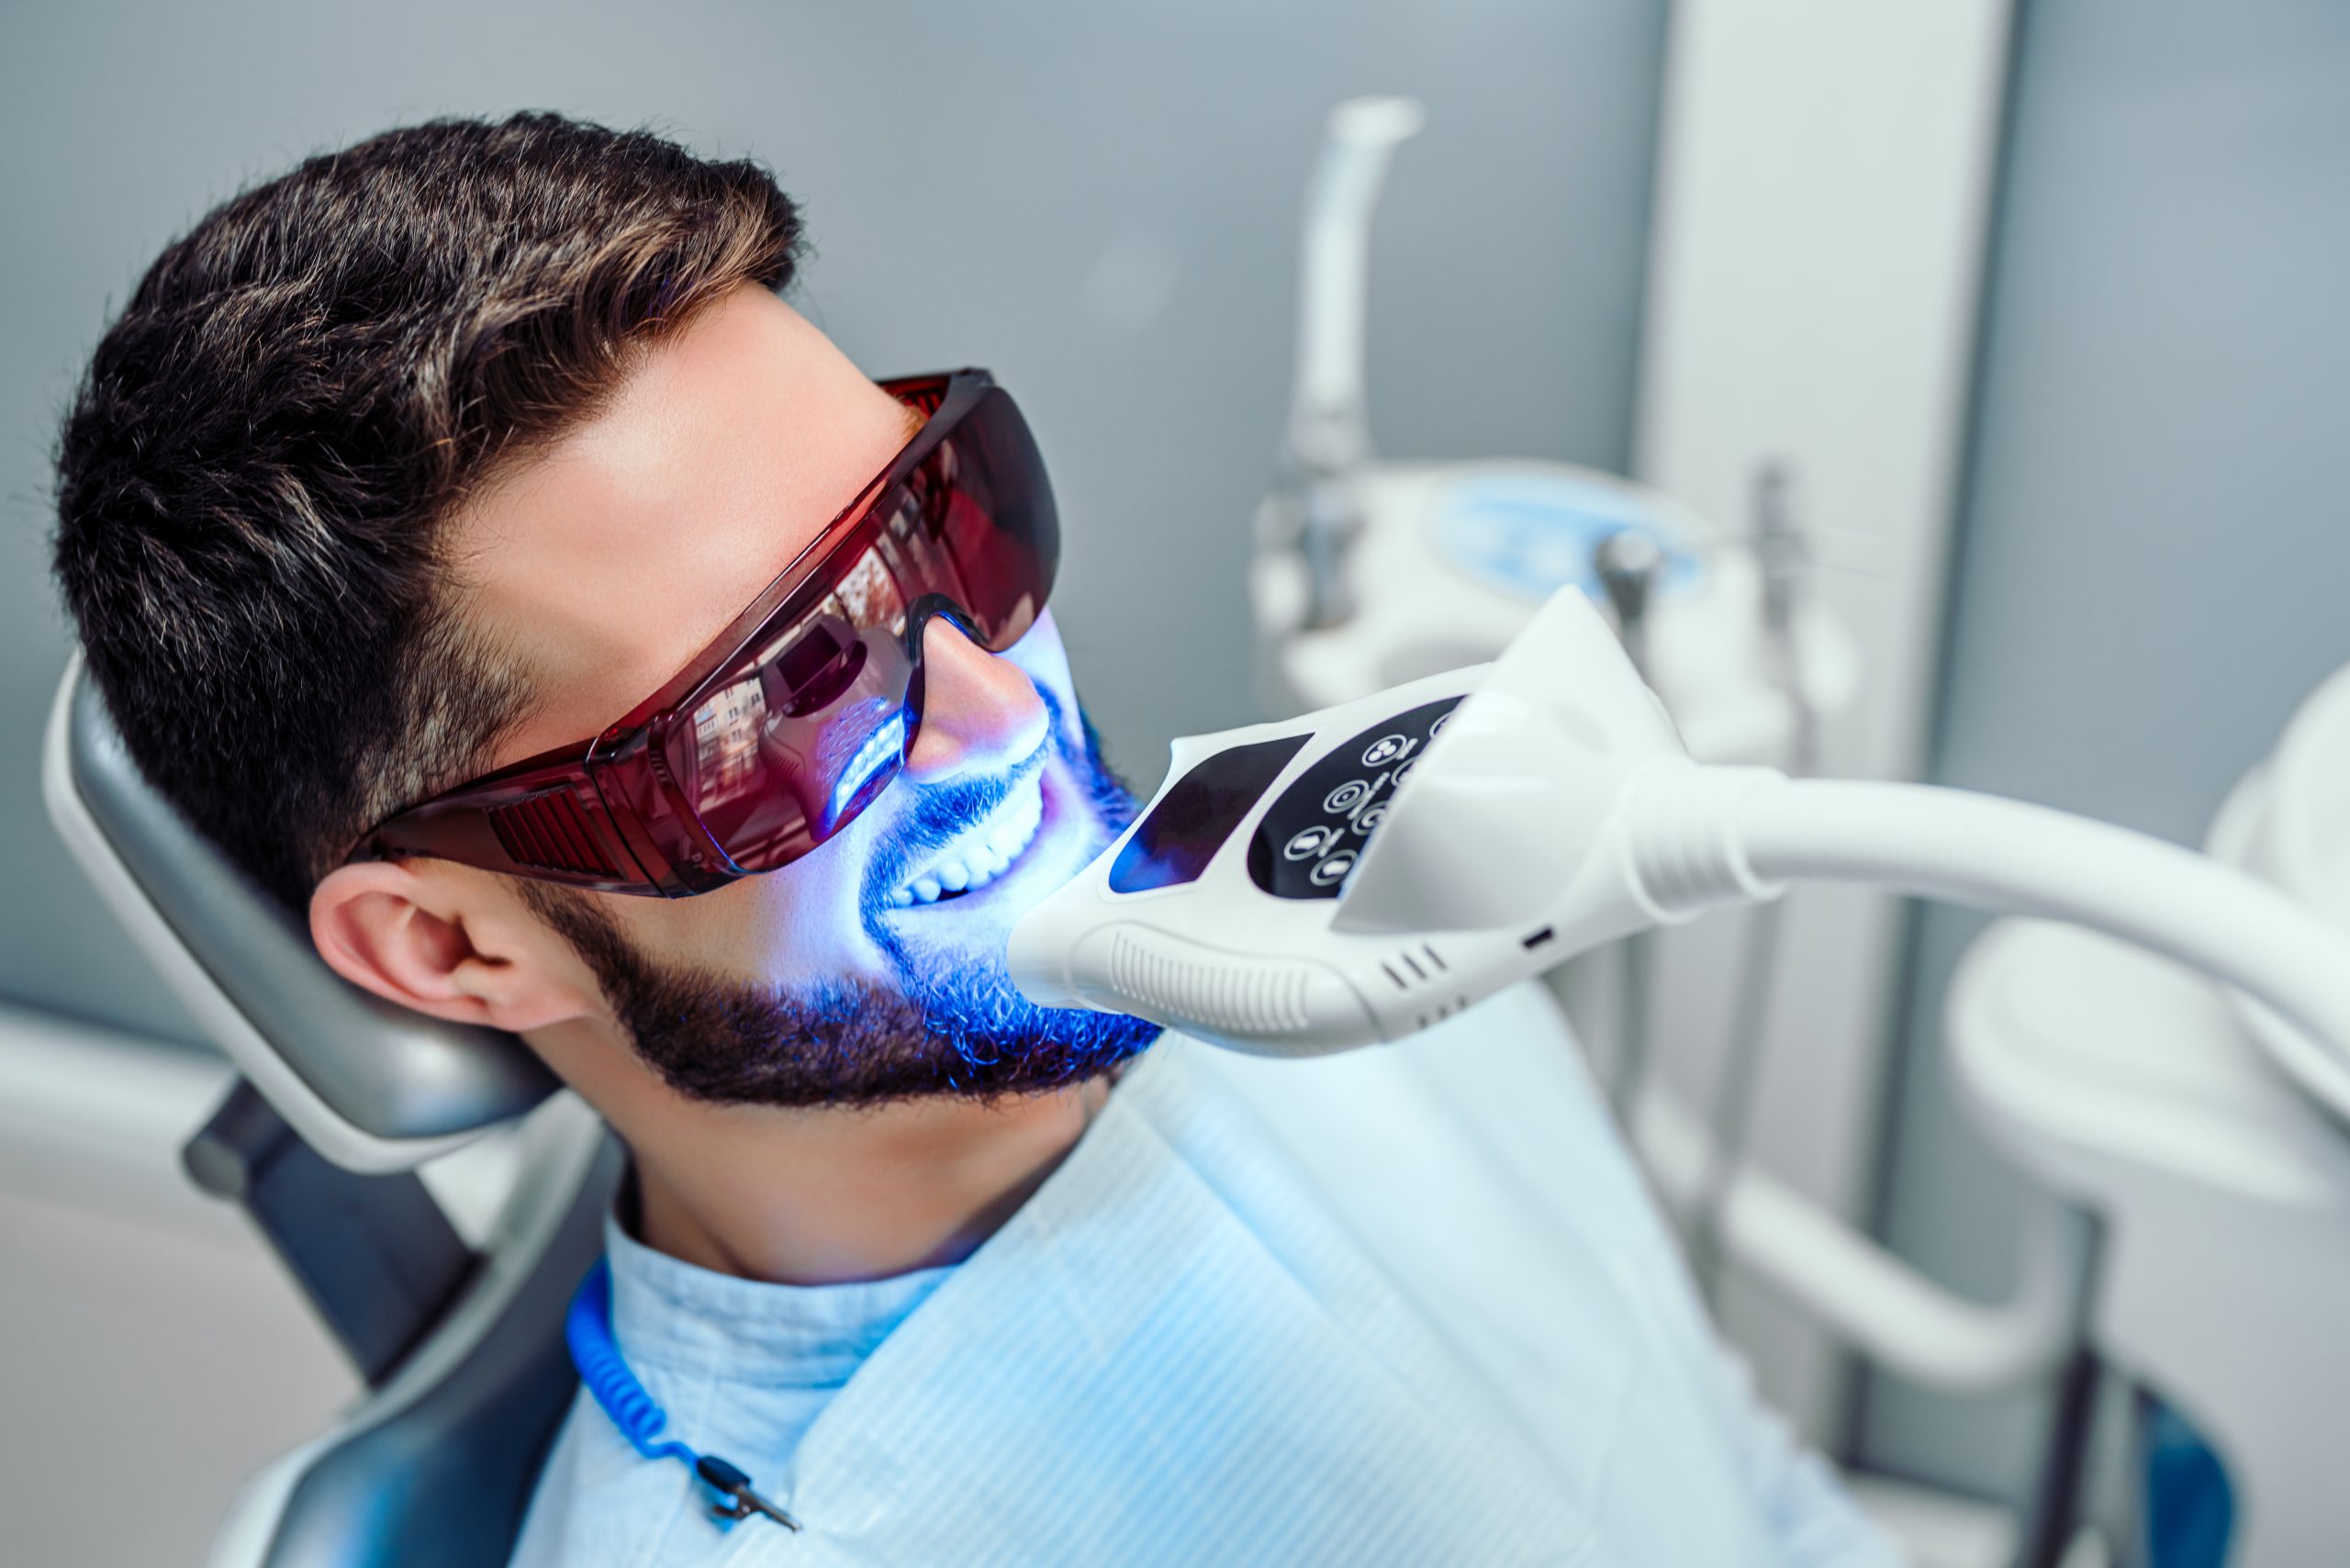 Patient sitting in dental chair wearing eye protection while a light is shining on their teeth to activate the whitening chemicals.